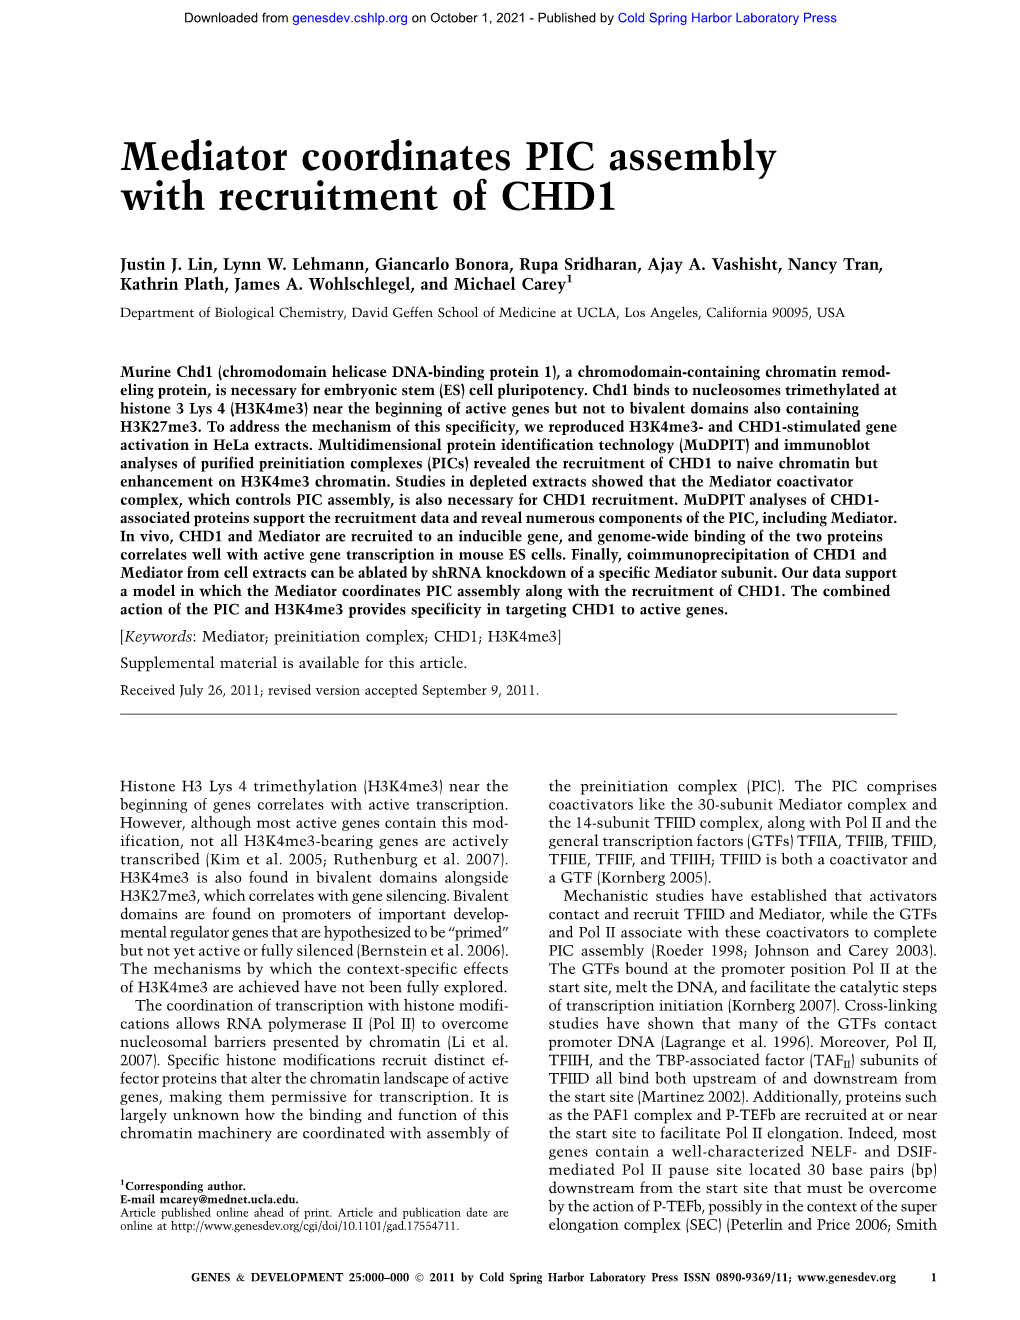 Mediator Coordinates PIC Assembly with Recruitment of CHD1